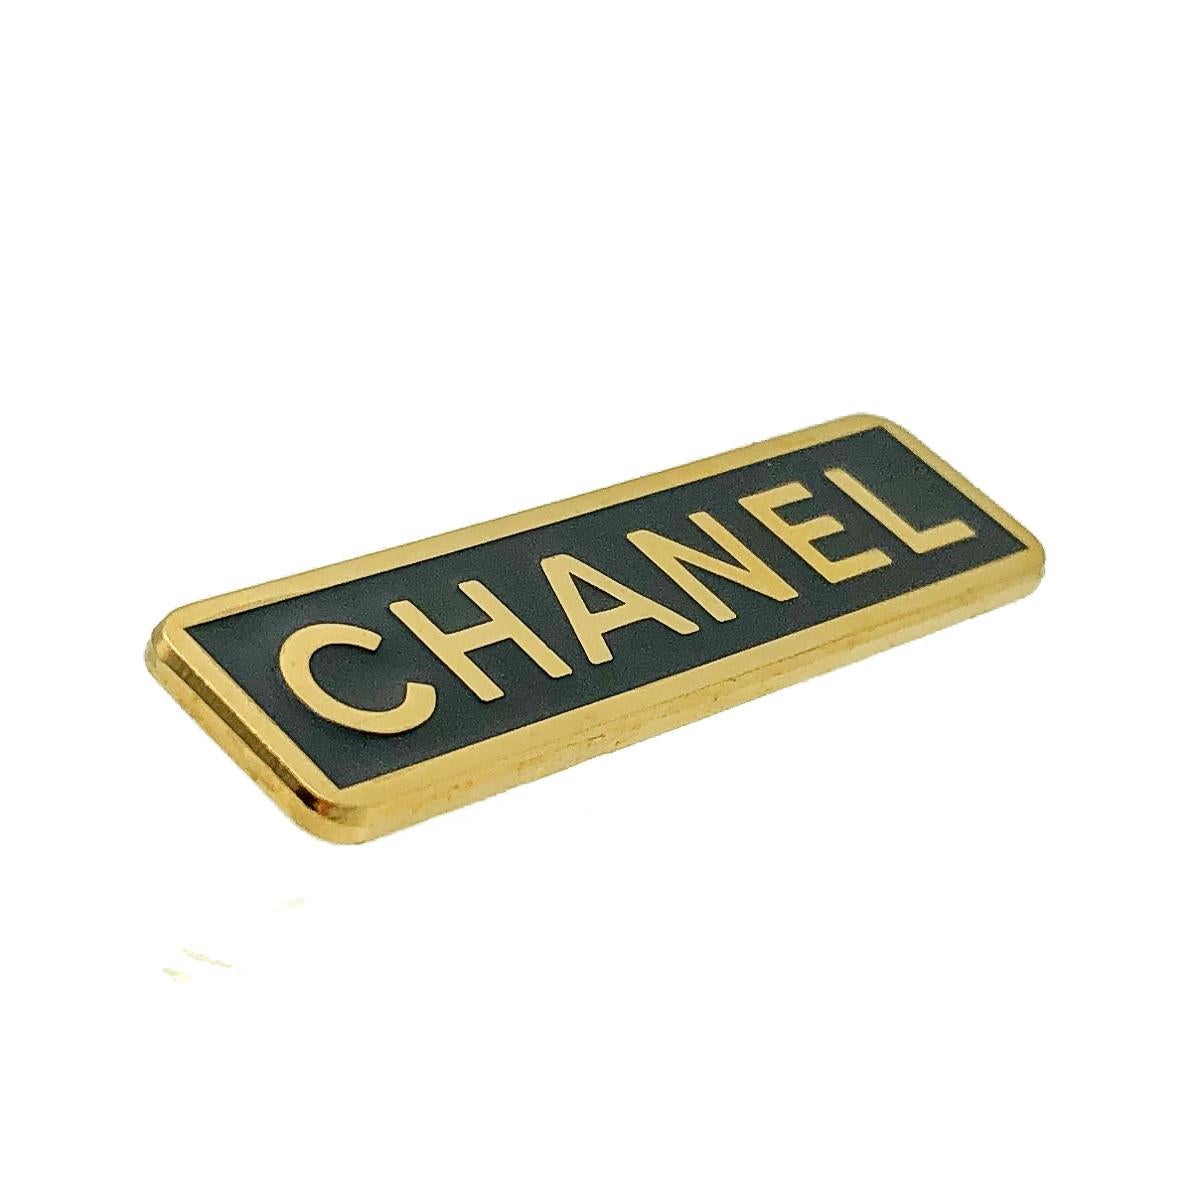 Vintage Chanel Black Enamel Employee Pin 1990s In Good Condition For Sale In Wilmslow, GB